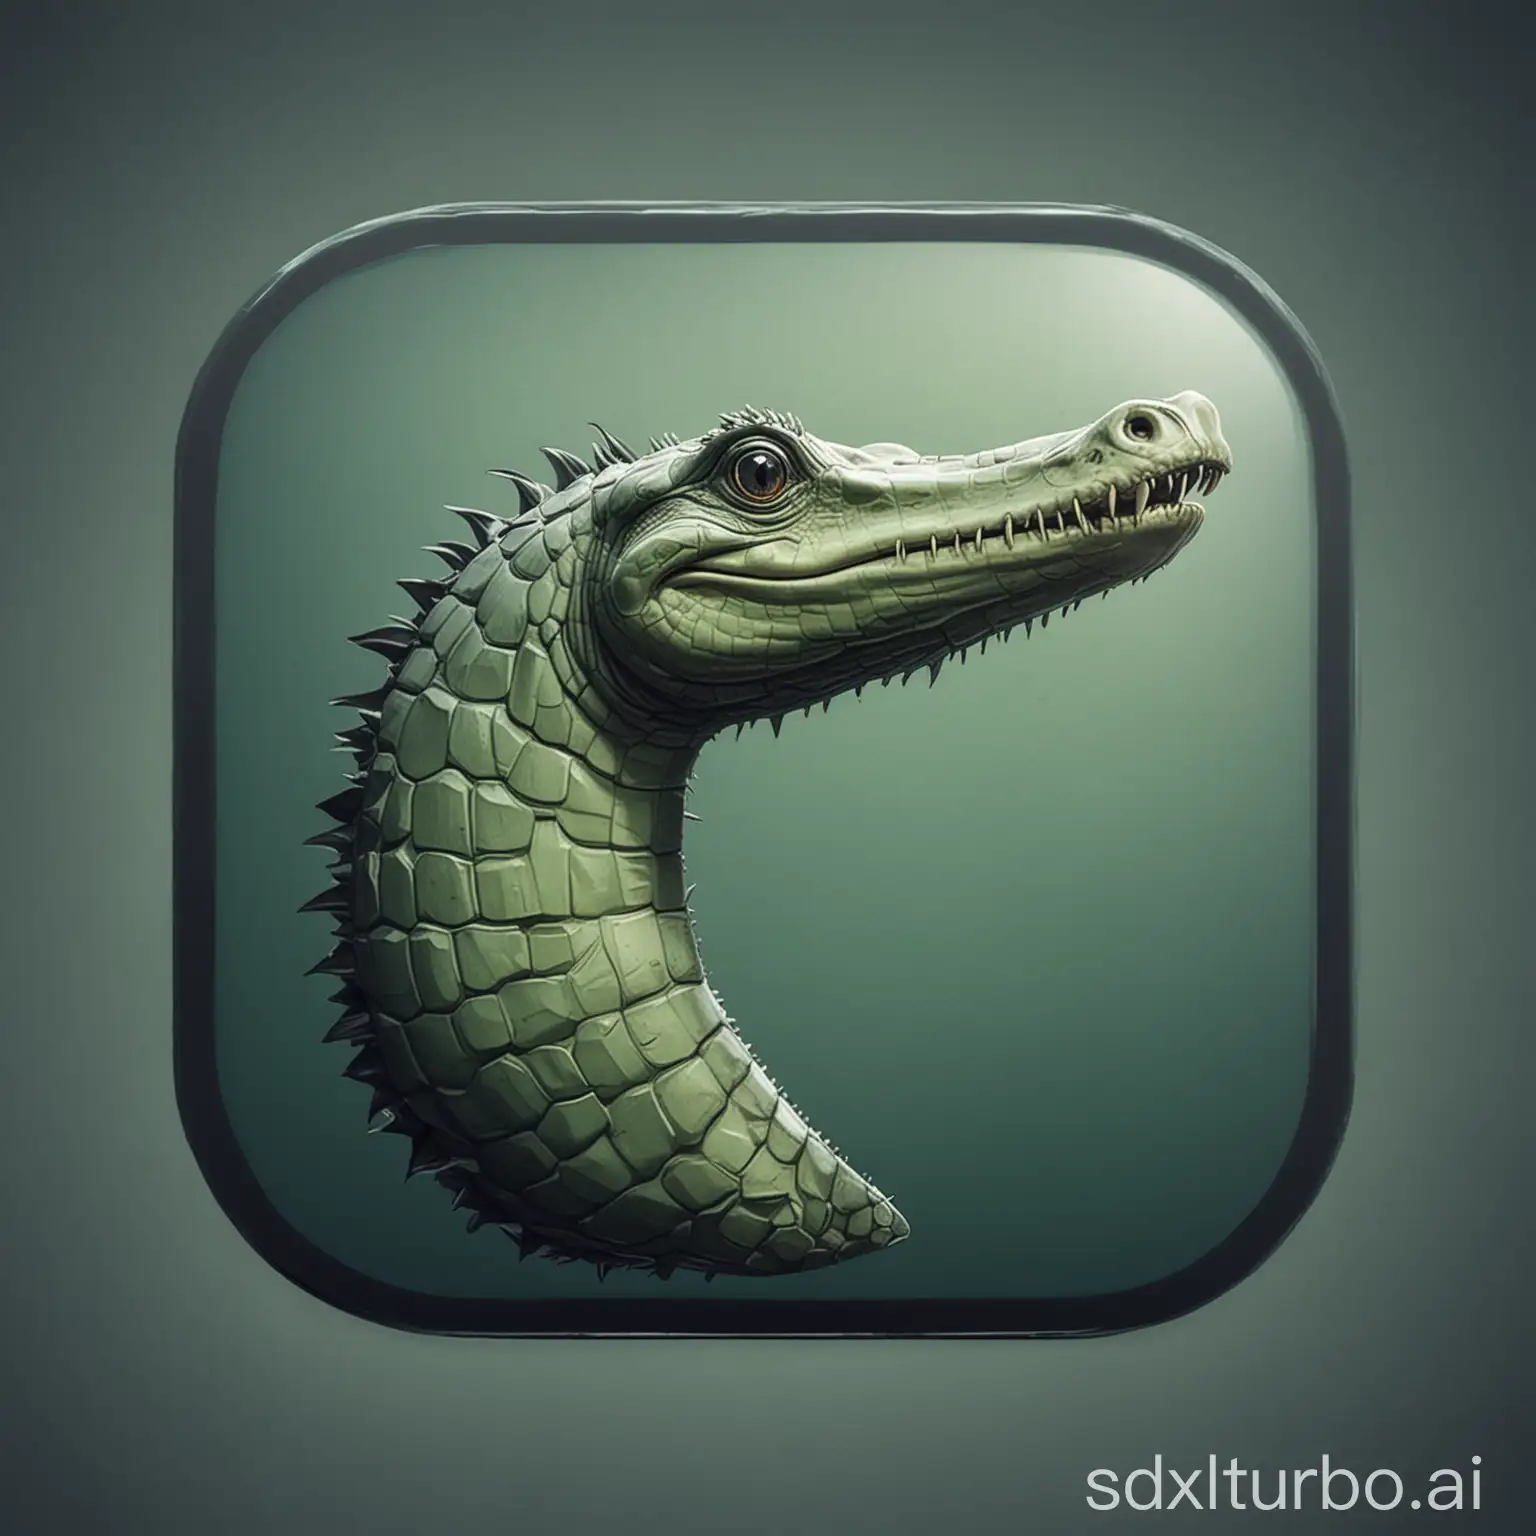 stylized app icon of a gharial